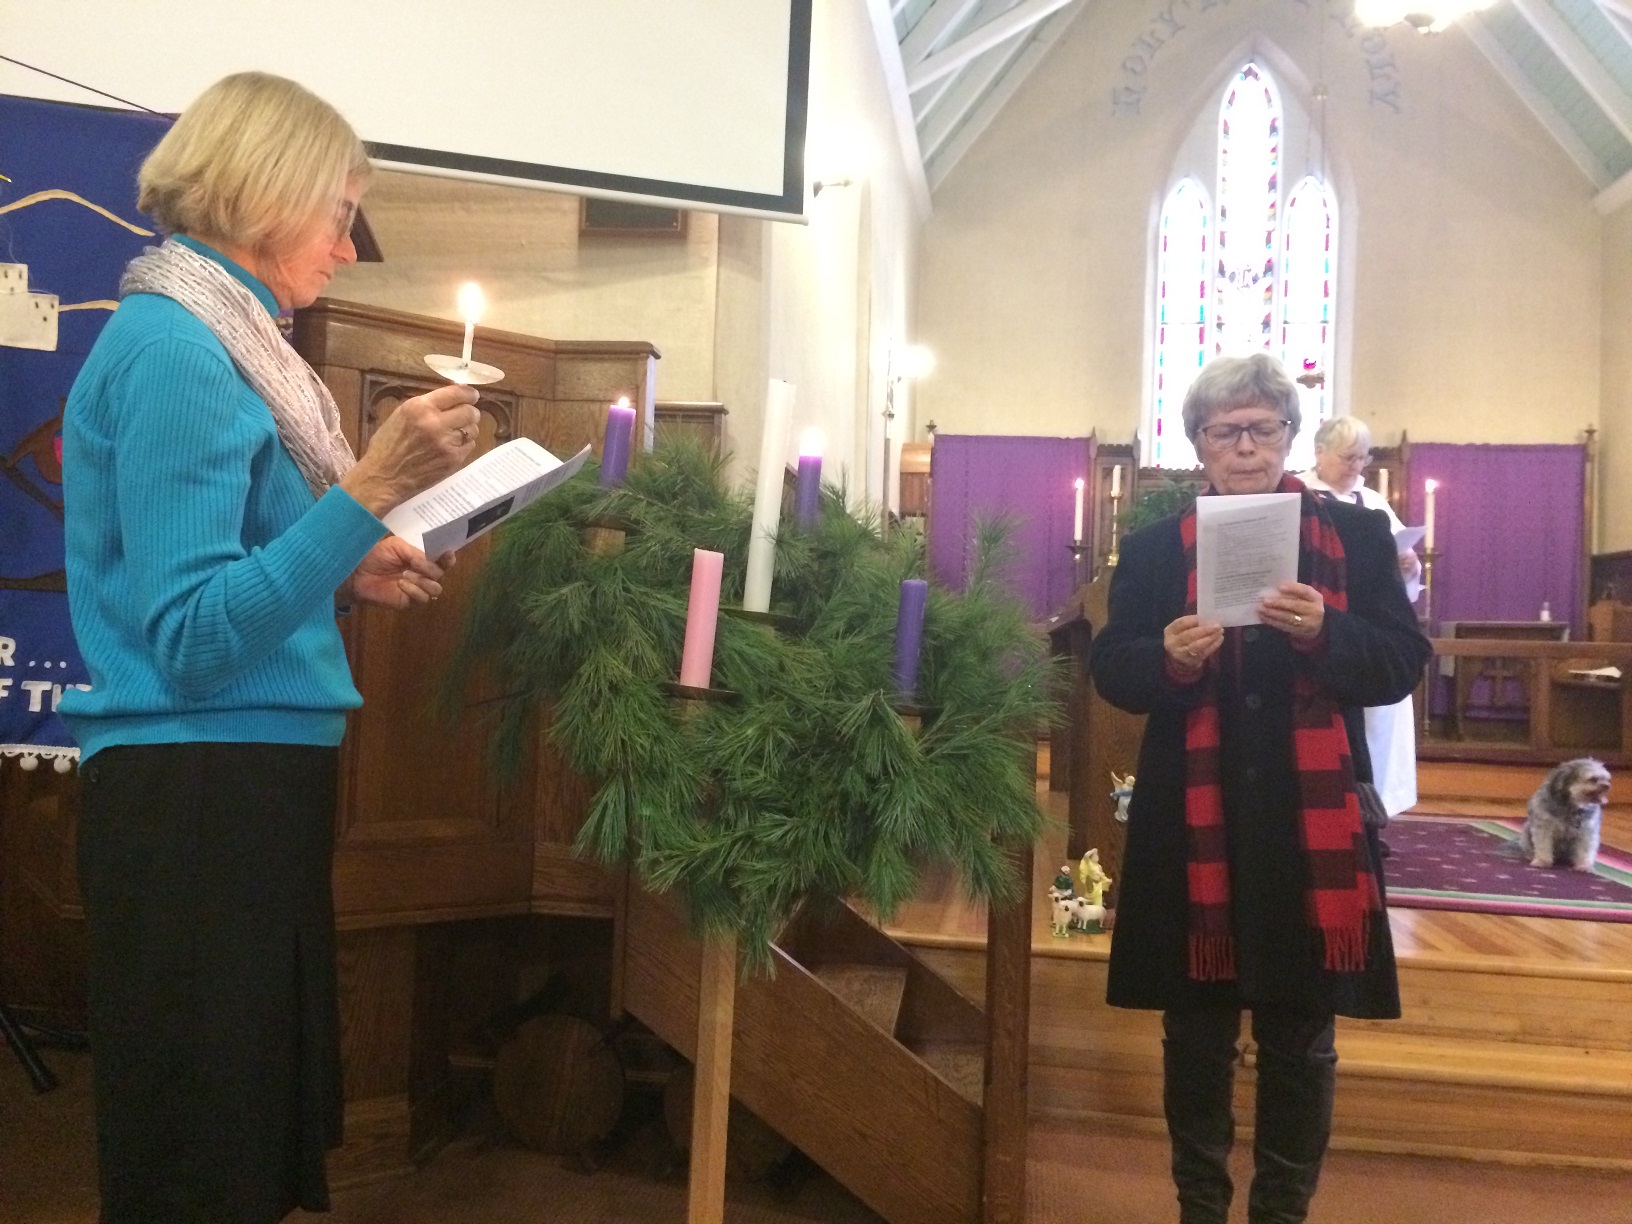 Second Sunday of Advent - Candles were lit by Clair MacInnis and Carol Simms